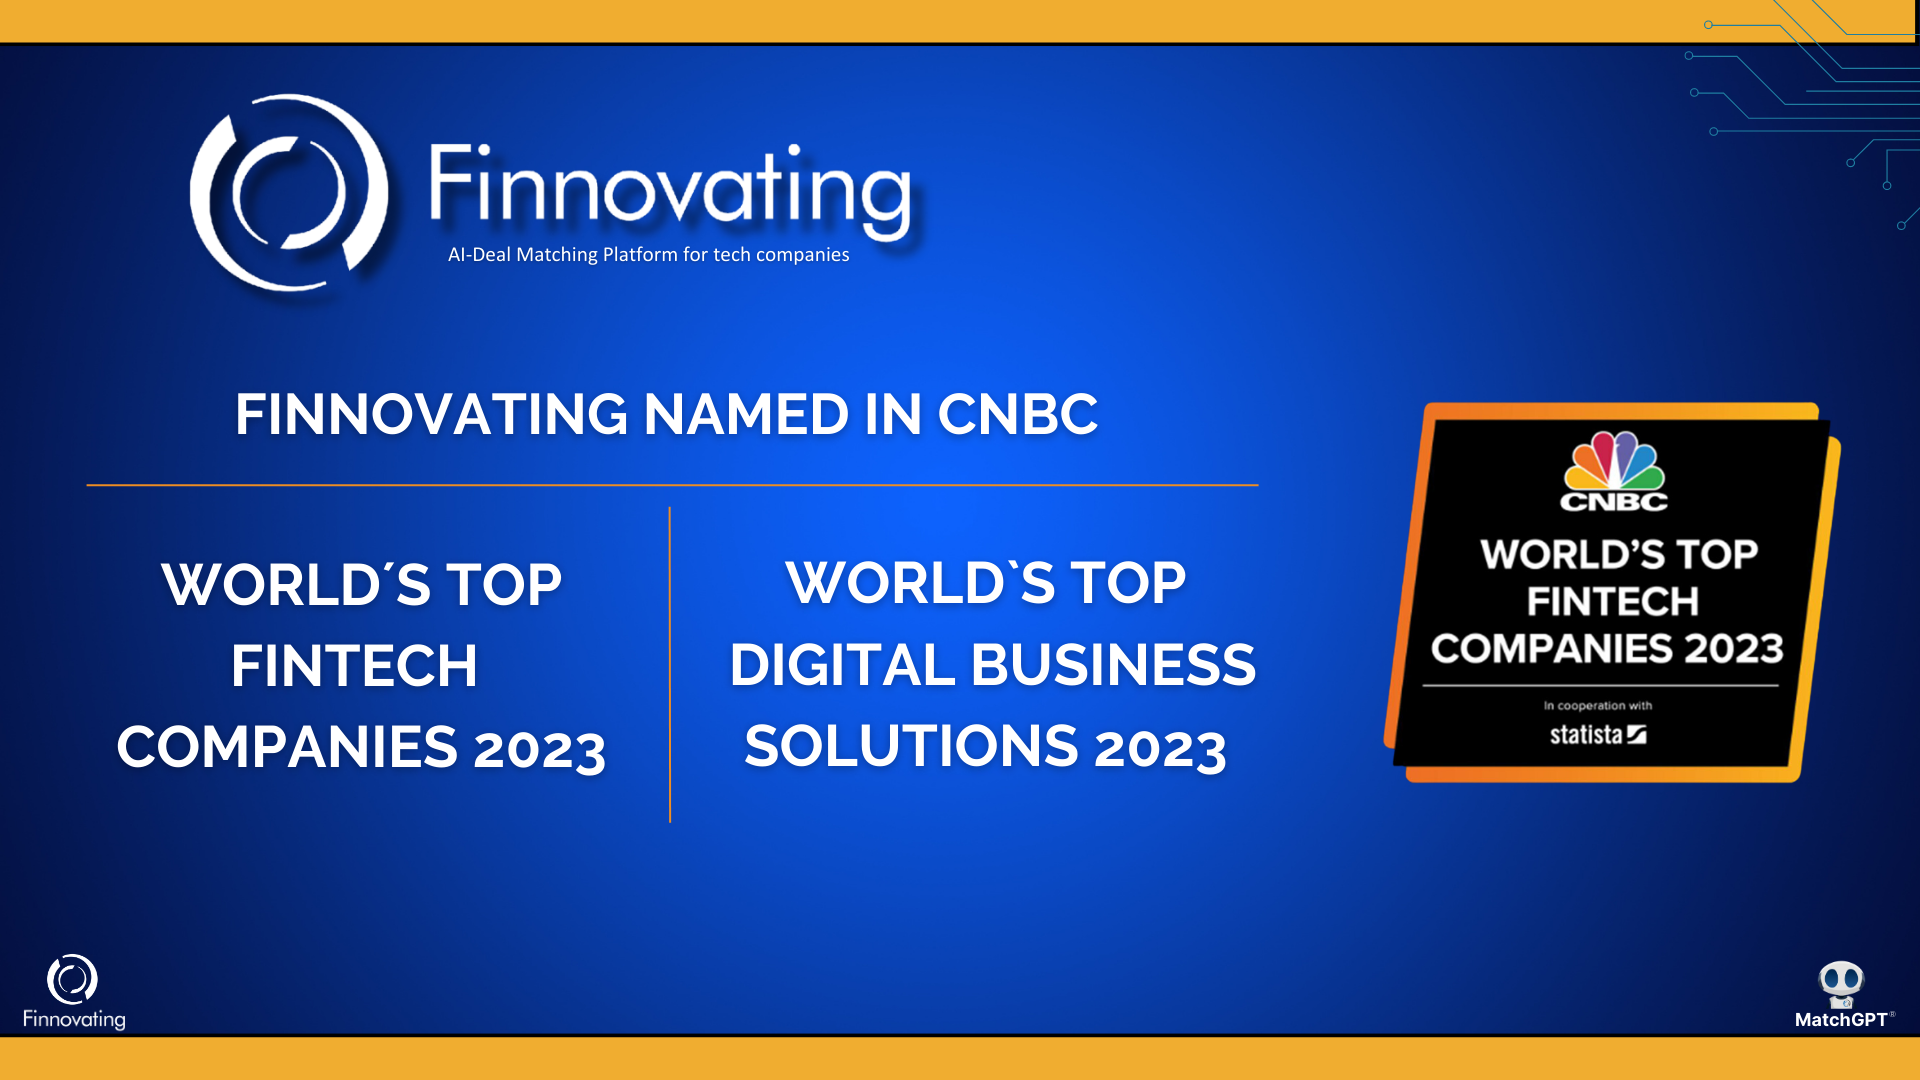 Finnovating Named as One of the Top 25 Digital Business Solutions Companies in the World